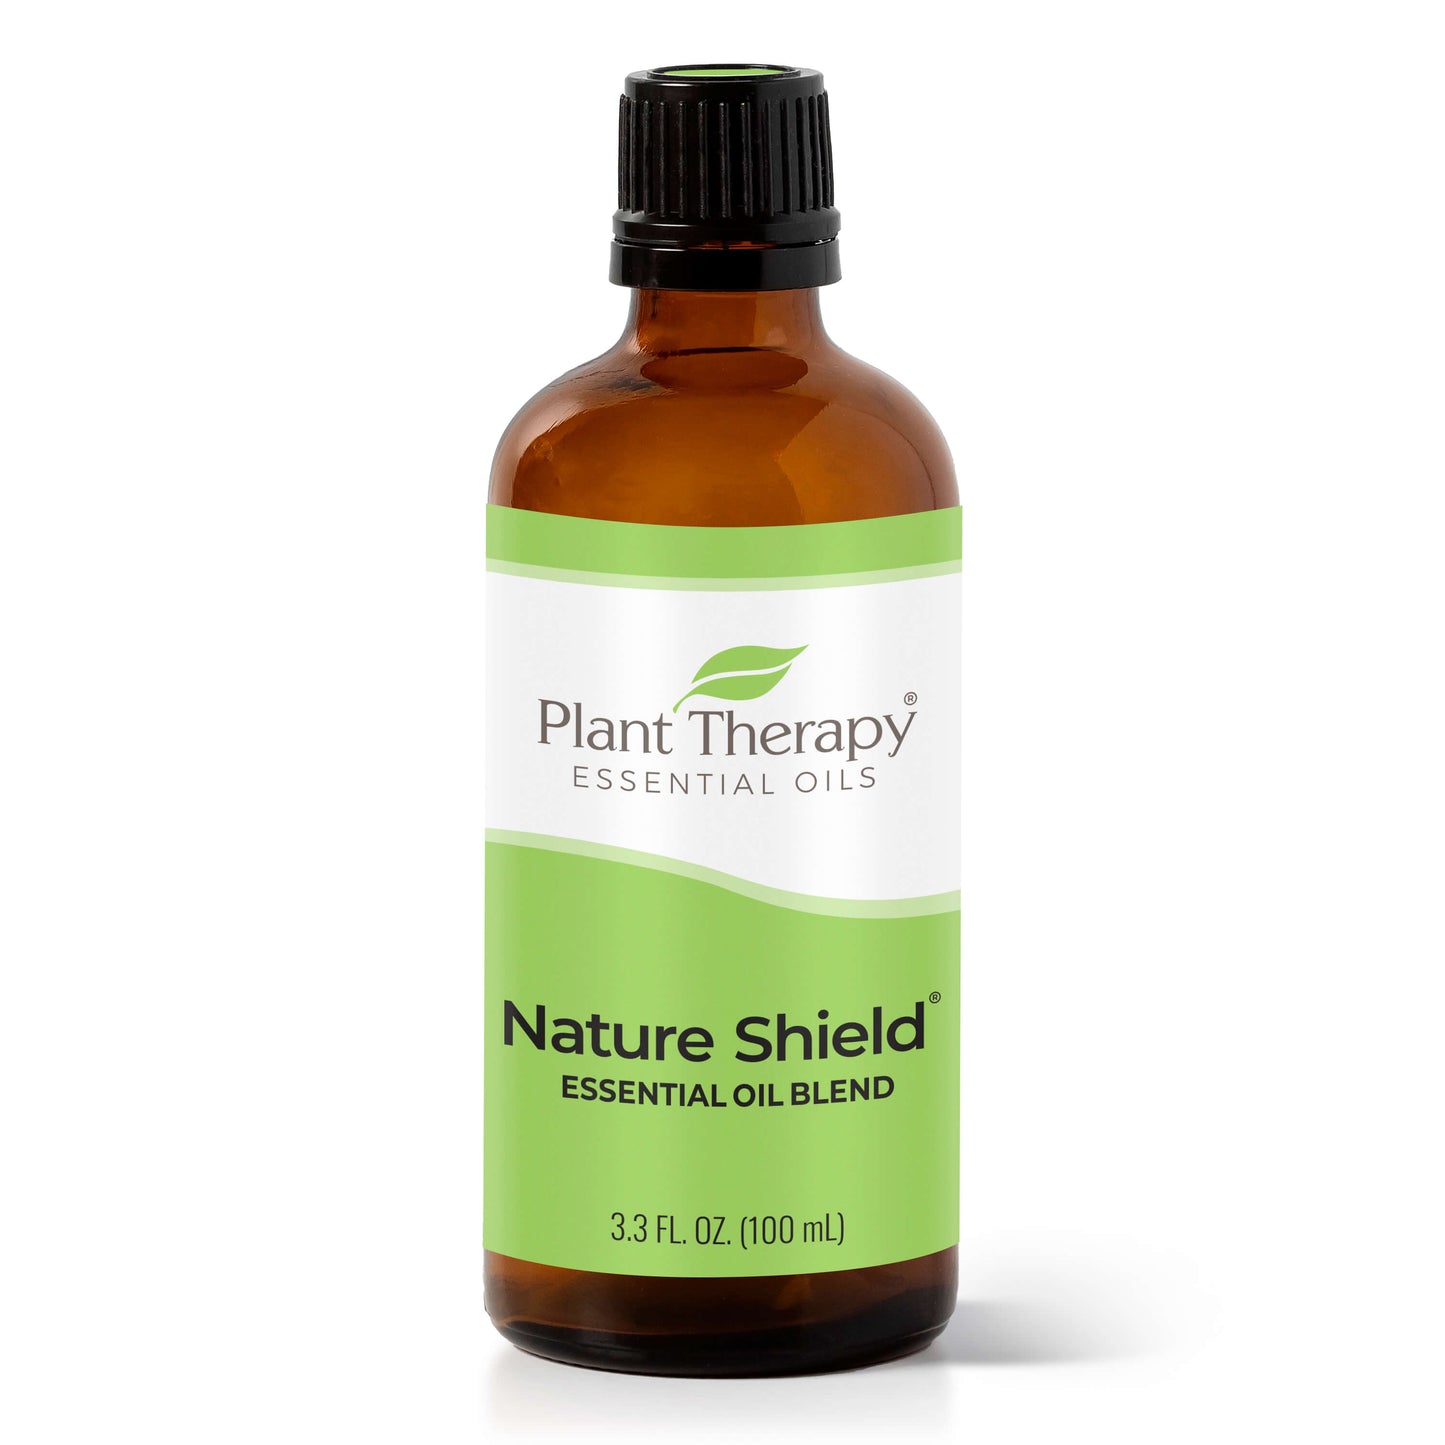 Plant Therapy Nature Shield Synergy Essential Oil 100 ml (3.3 oz) 100% Pure, Undiluted, Therapeutic Grade